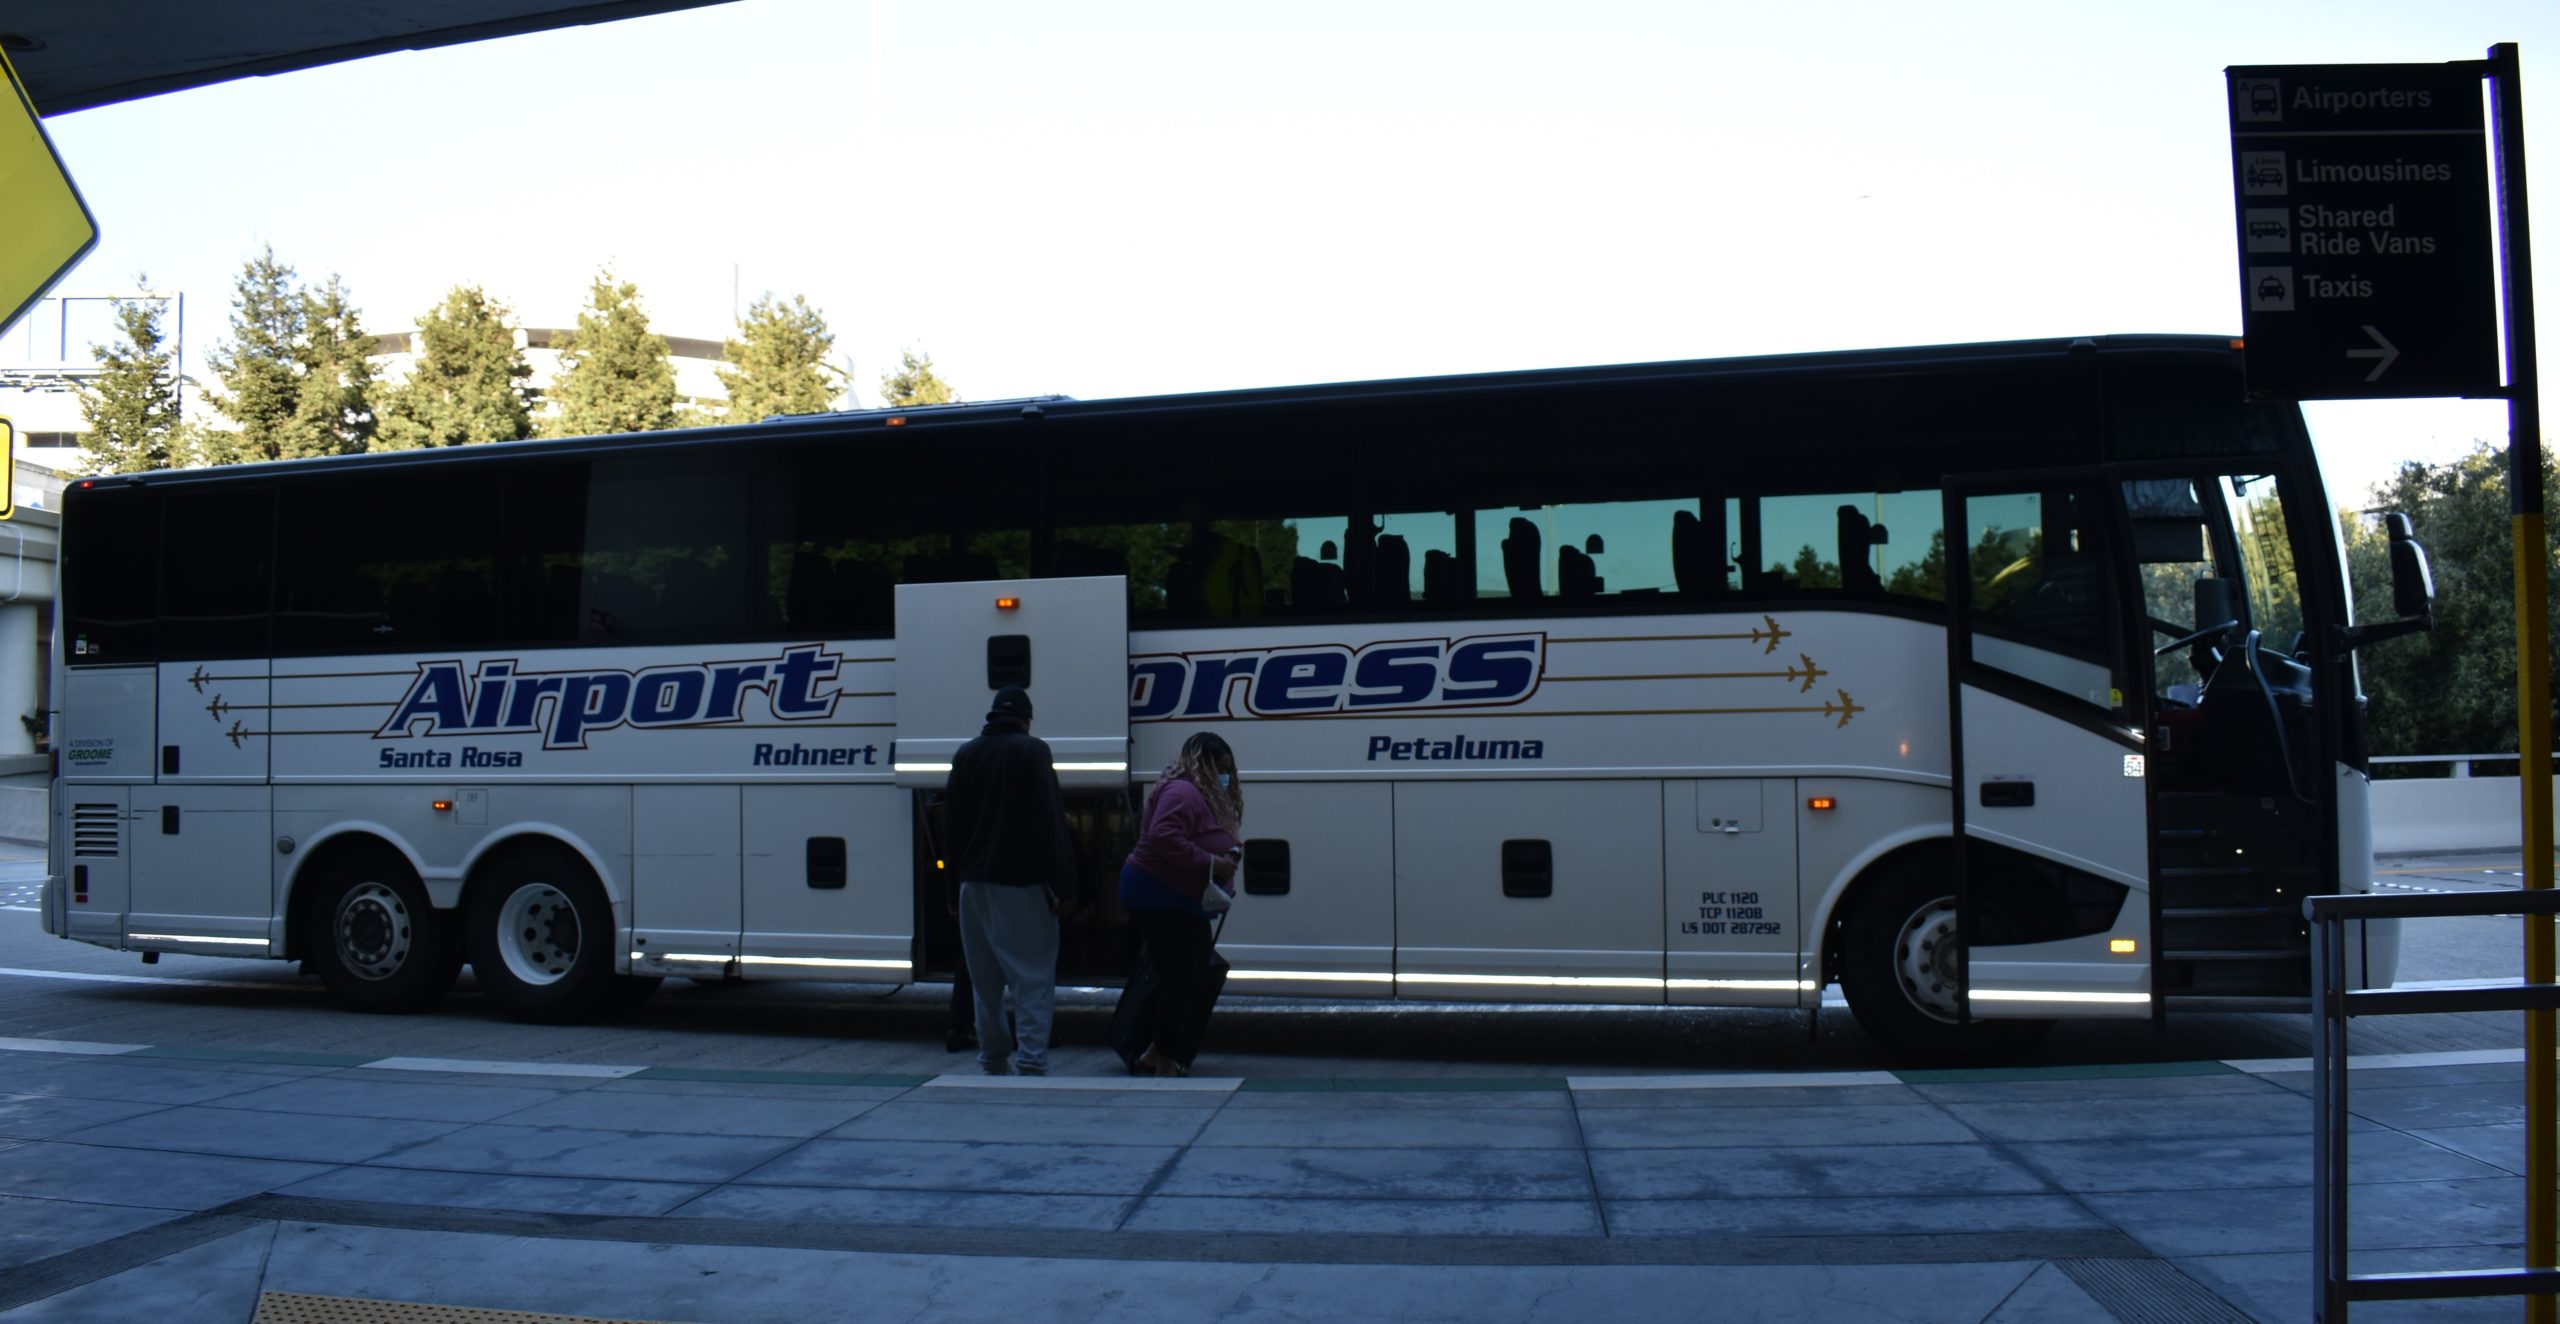 Sonoma County Airport Express Review: Bus Option for SFO/OAK Flights